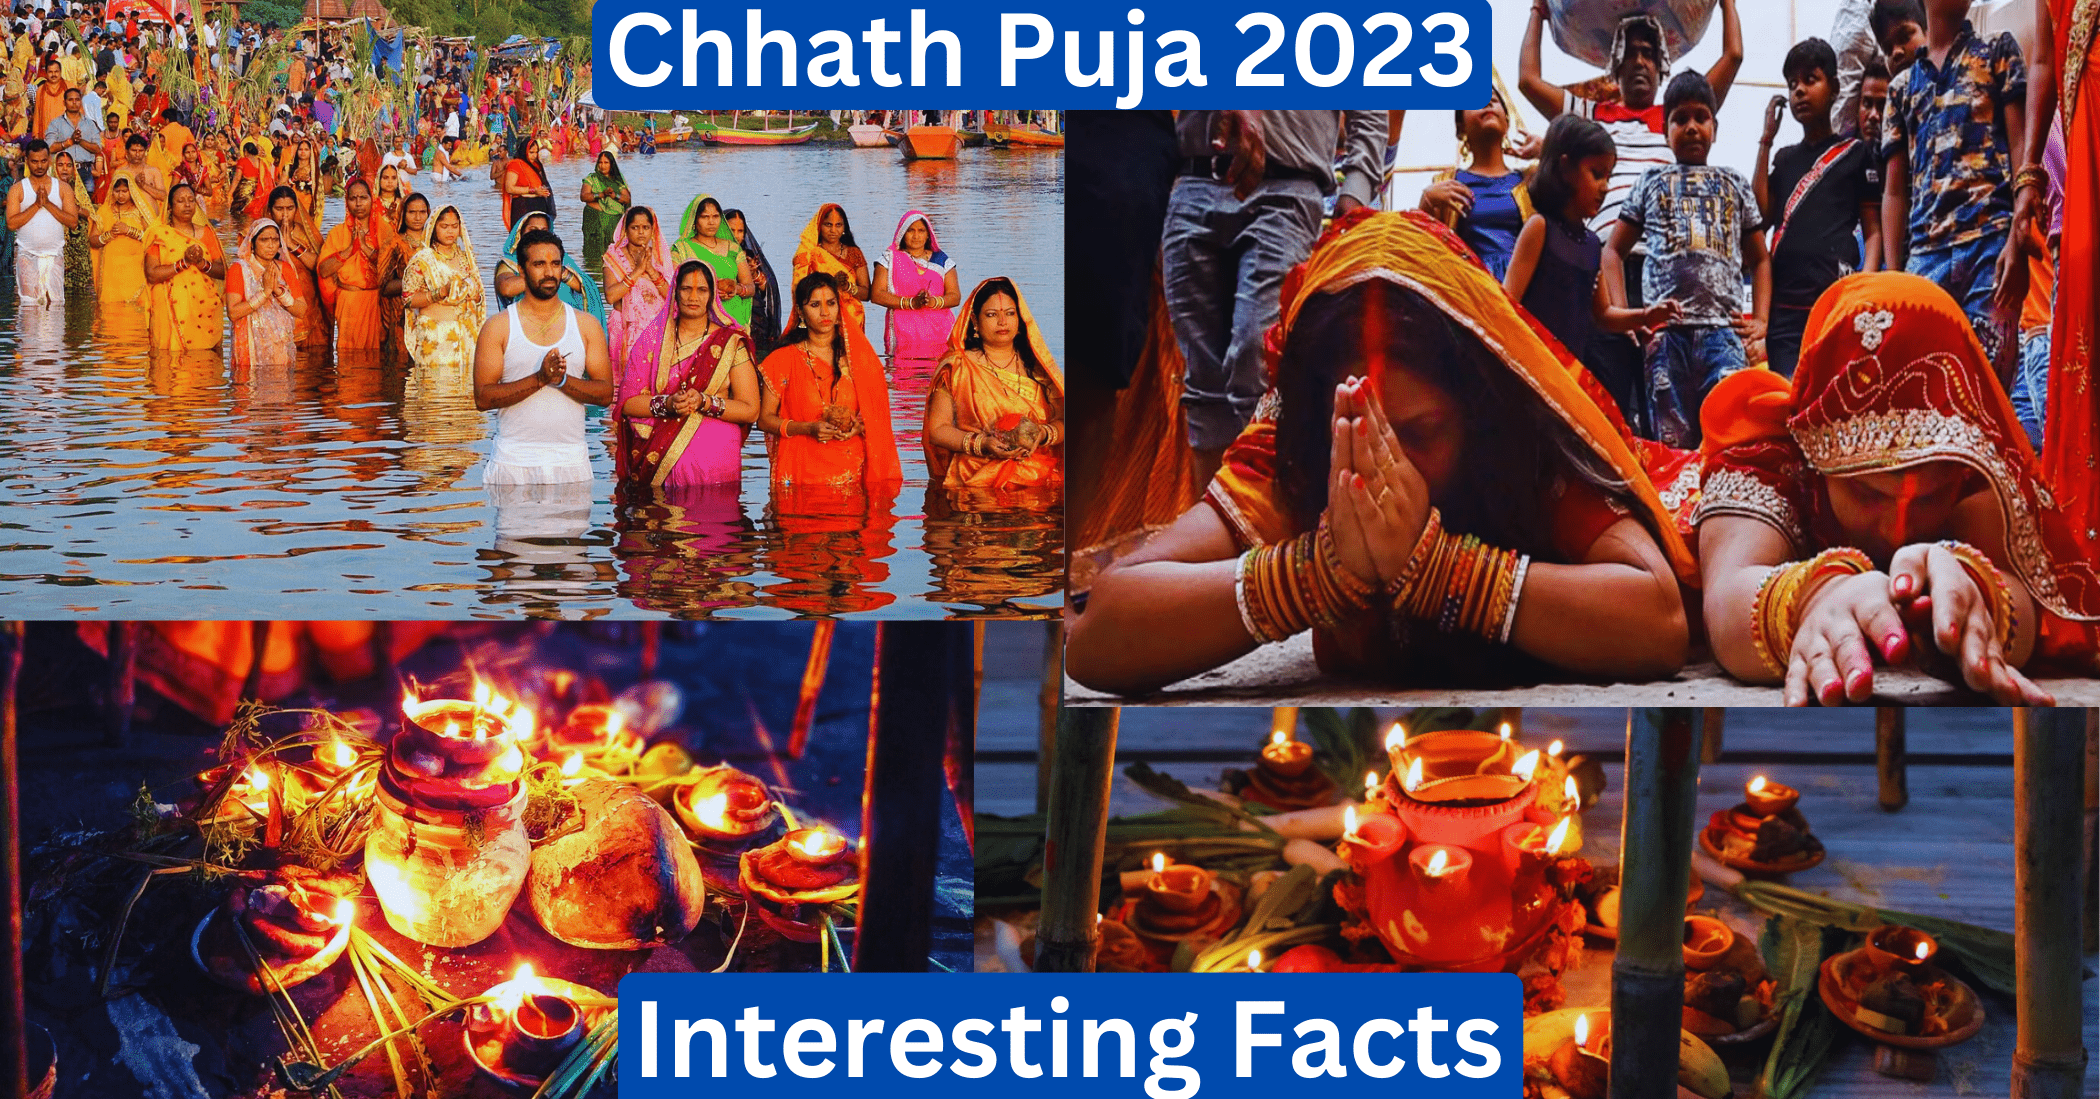 Chhath puja story rituals and traditions: Chhath Puja 2022 Dates